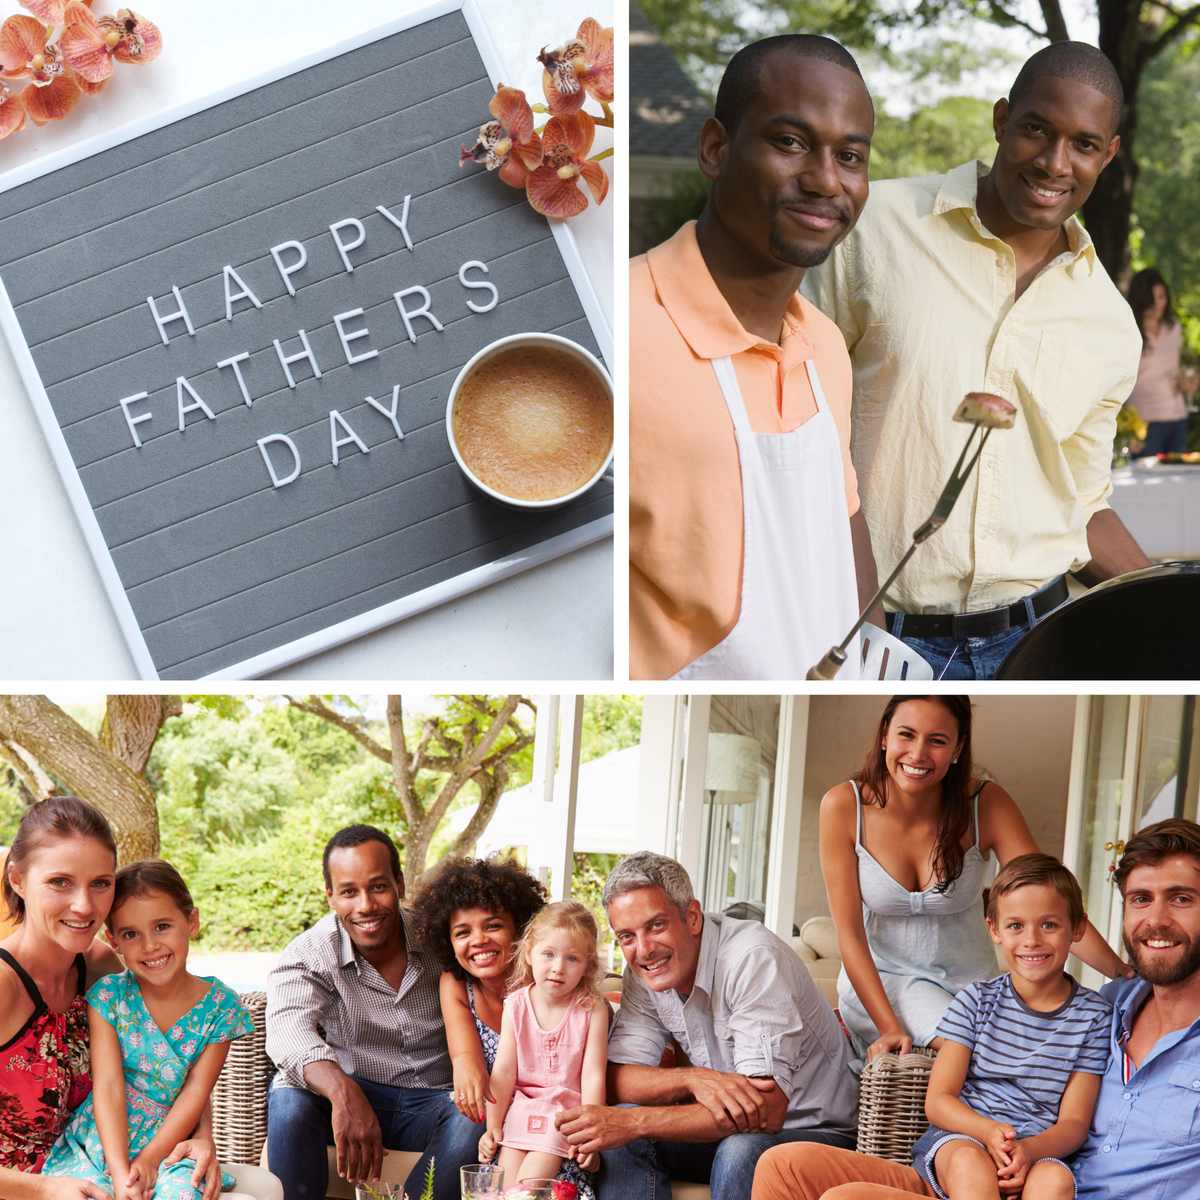 Father's Day Message Board, Dad friends at cookout, father's day friends party.